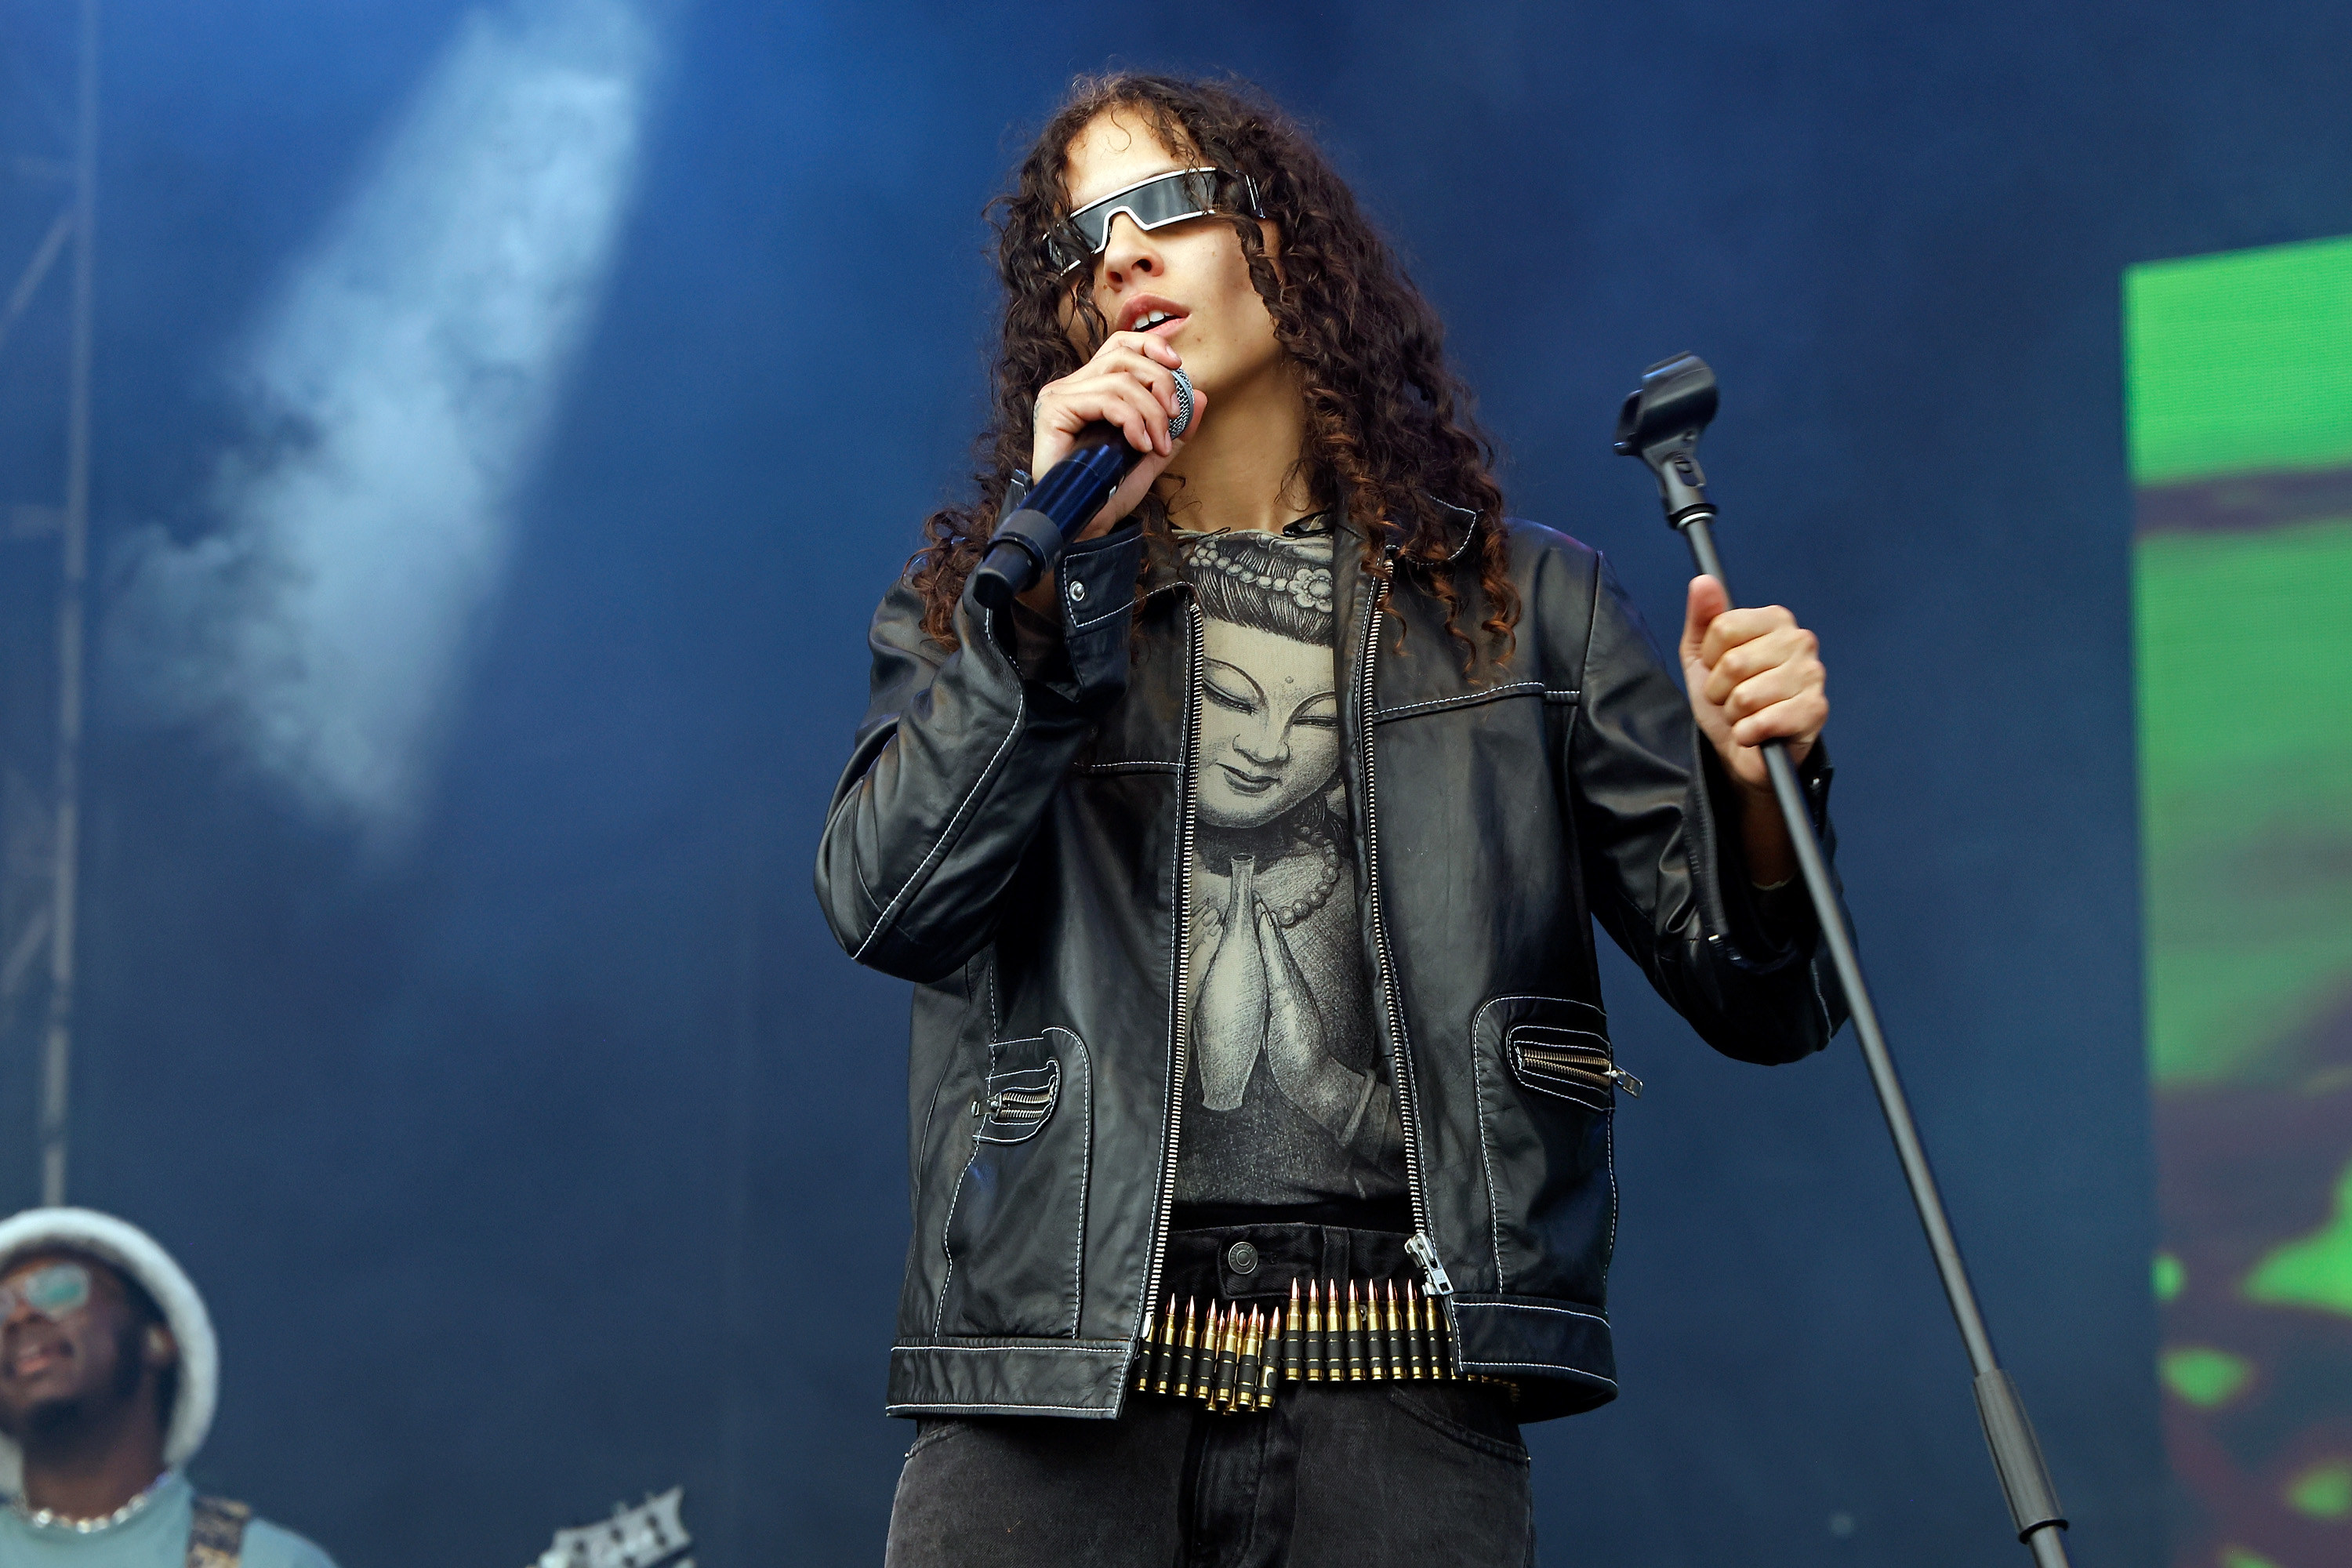 070 Shake performing onstage and wearing a jacket and bullet belt